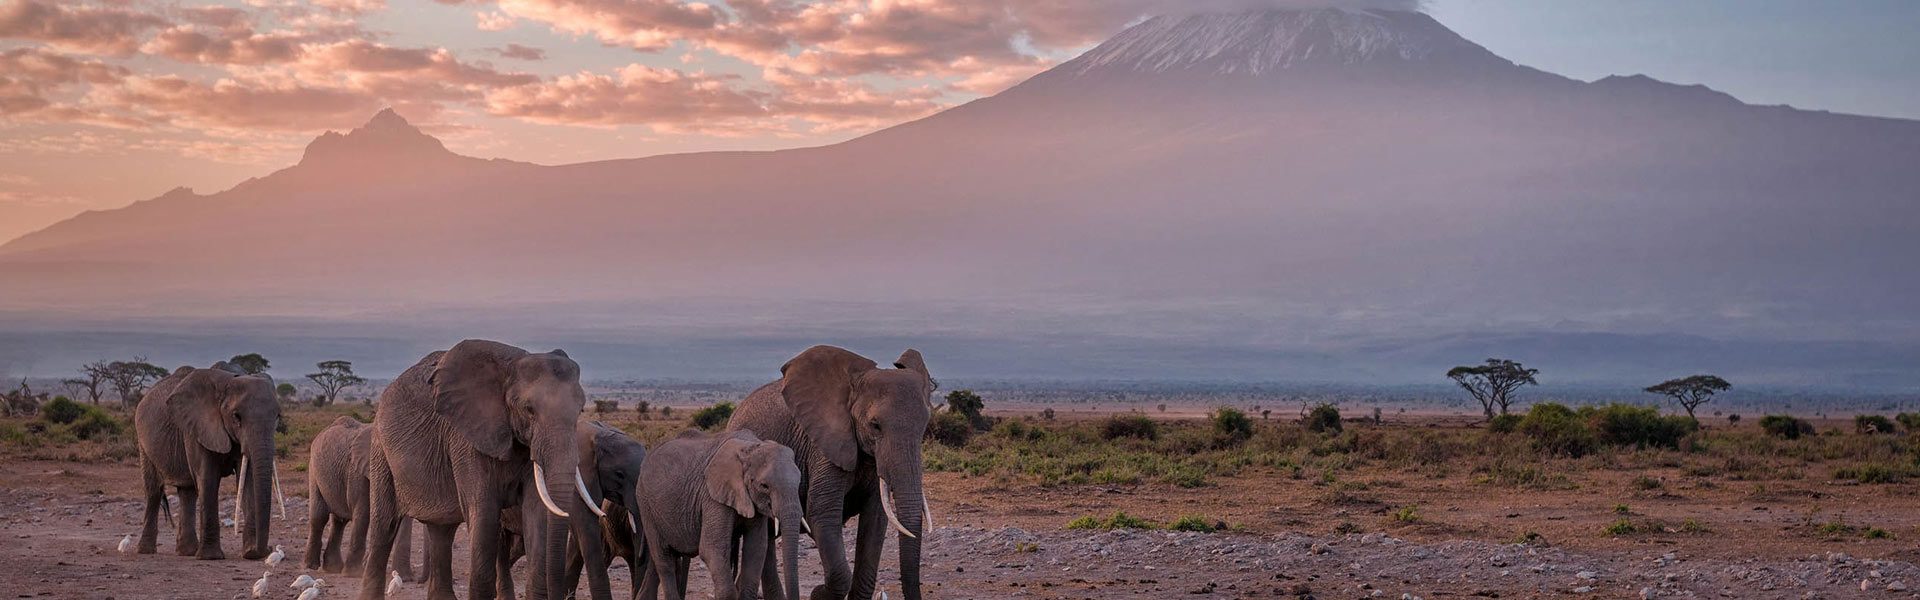 Kilimanjaro National Park Is Home To Africa'S Highest Peak. Explore Diverse Ecosystems, Spot Unique Wildlife, And Embark On Unforgettable Treks.